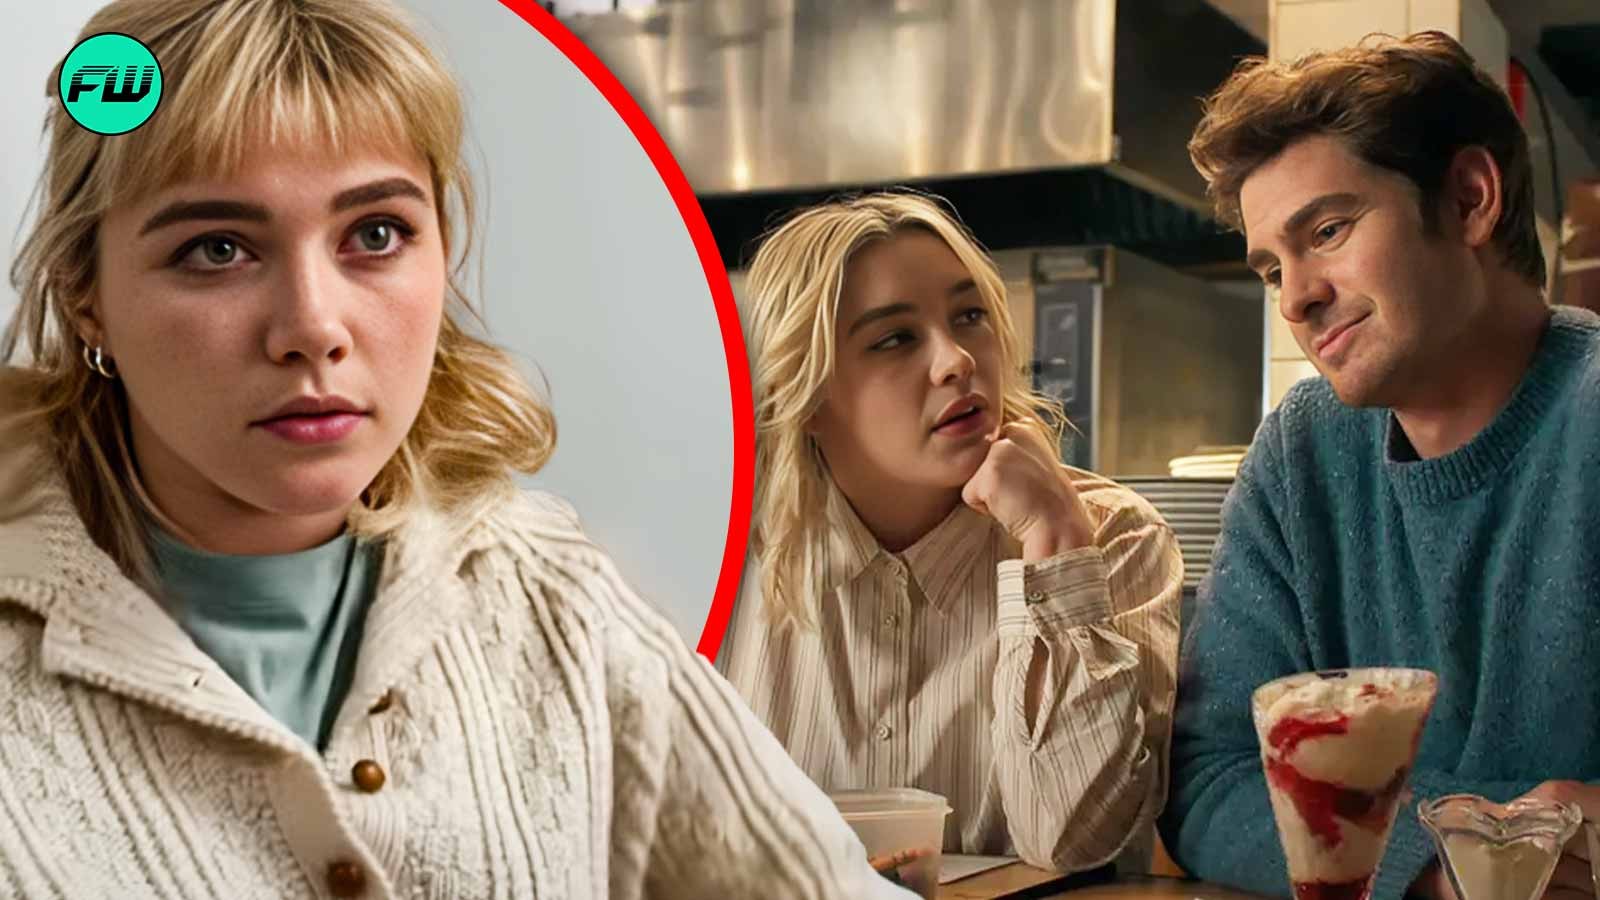 Andrew Garfield’s love story with Florence Pugh will move you to tears if you know the tragic story of Garfield’s mother